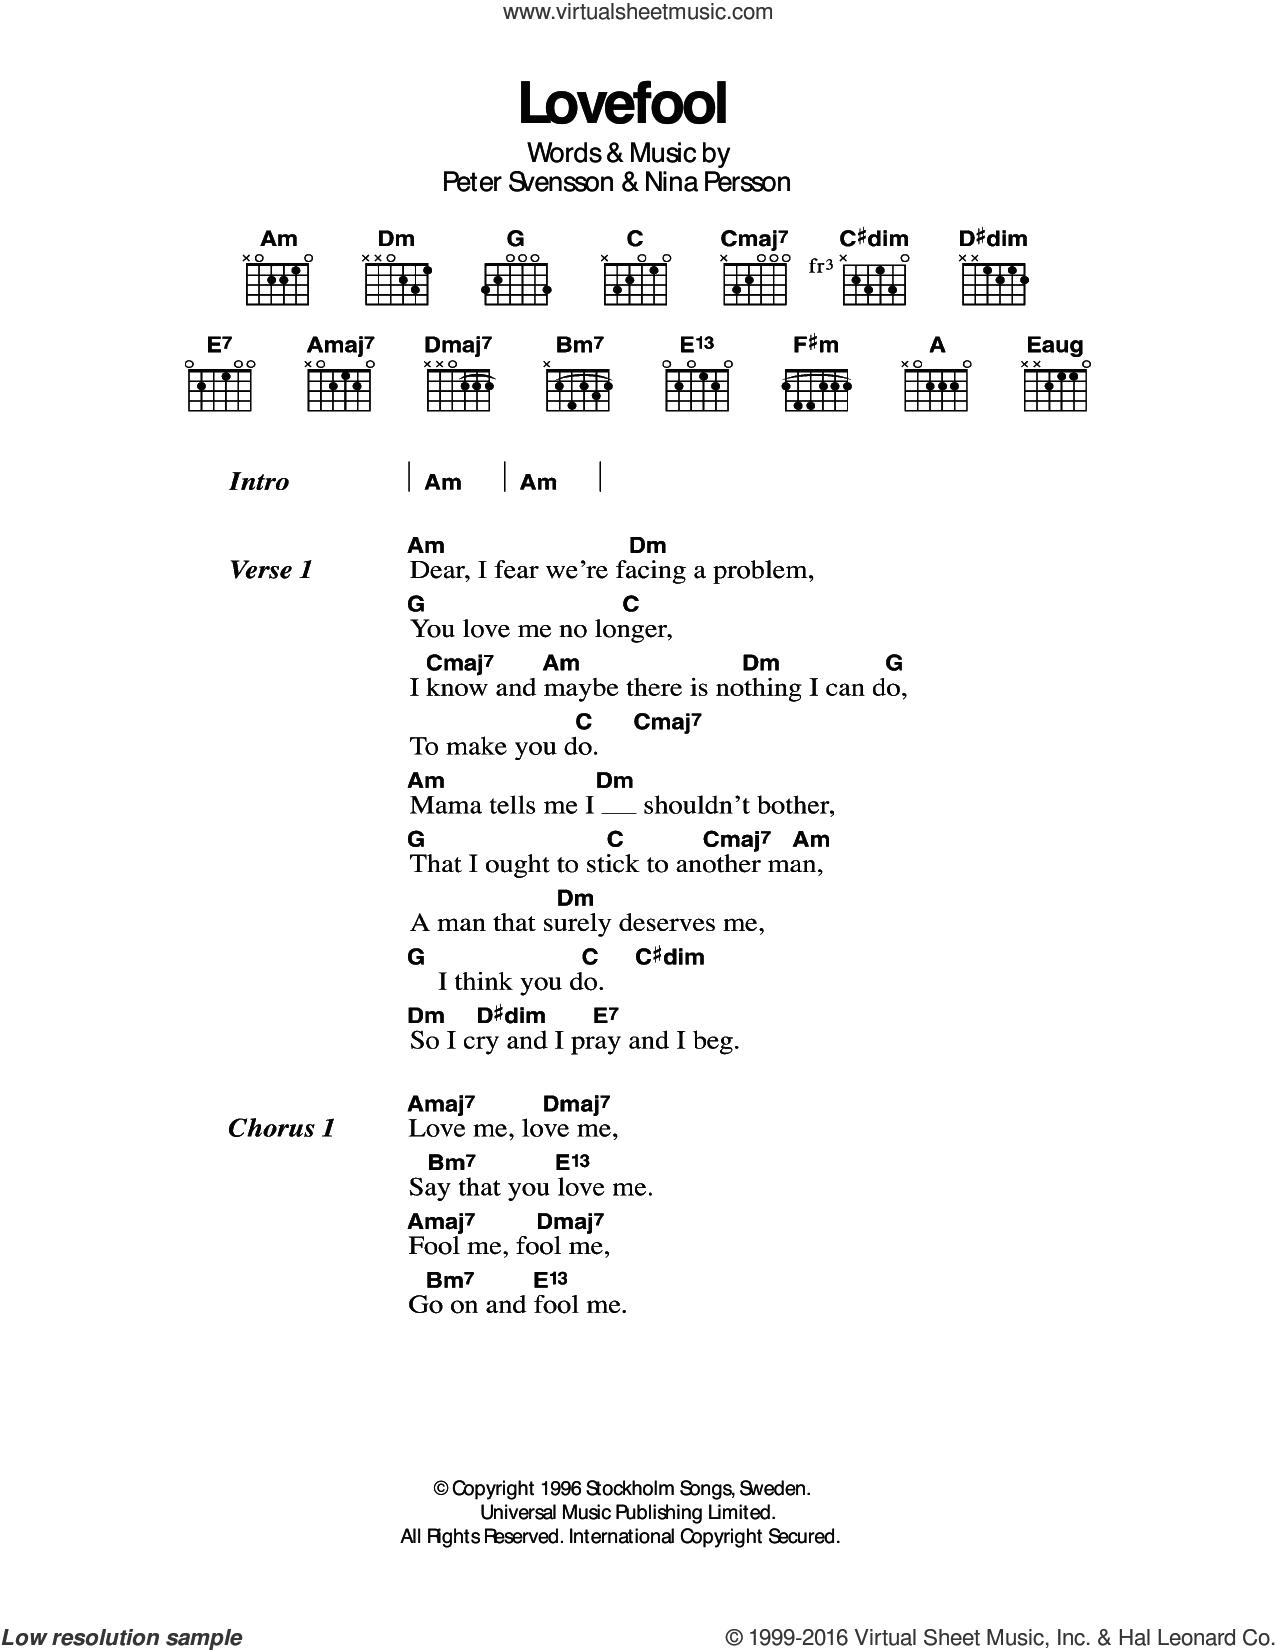 Cardigans Lovefool Sheet Music For Guitar Chords Pdf Patsy cline recorded many wonderful songs during her short career, however crazy lyrics and all other country classic song lyrics are the property of the respective artist, authors and labels, they are intended solely for educational purposes. cardigans lovefool sheet music for guitar chords pdf